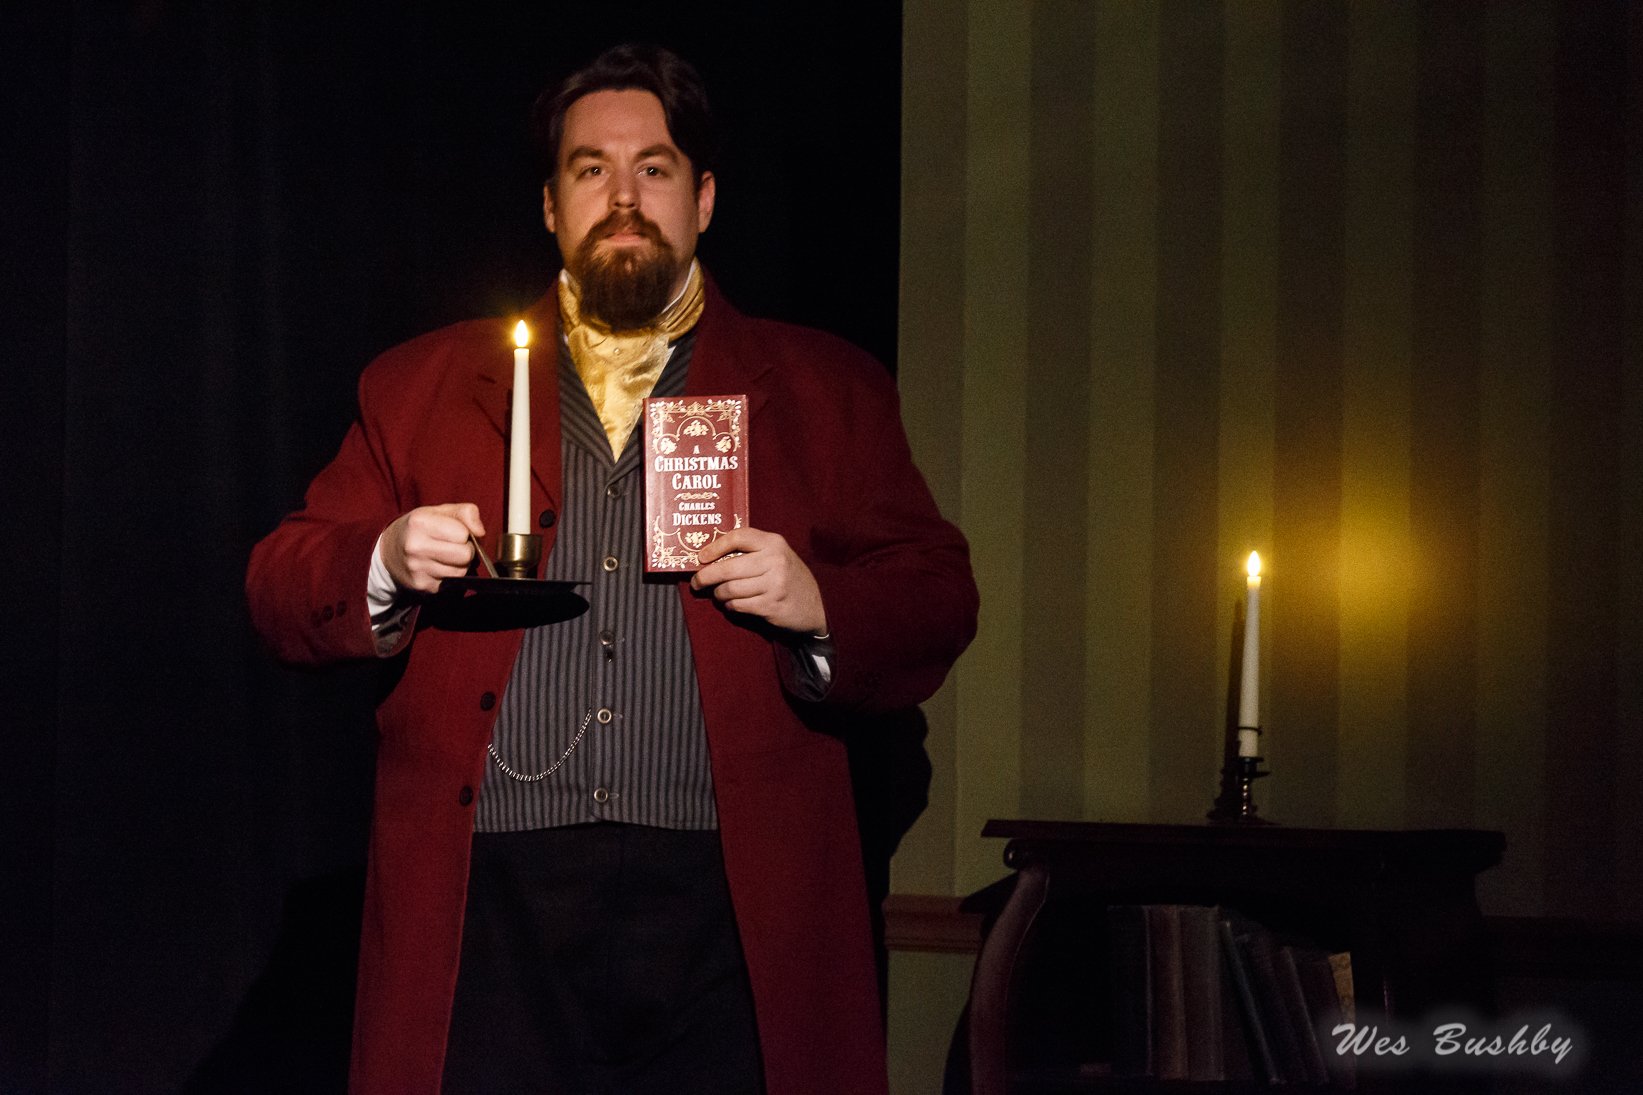 An Evening with Dickens or A One-Man Christmas Carol